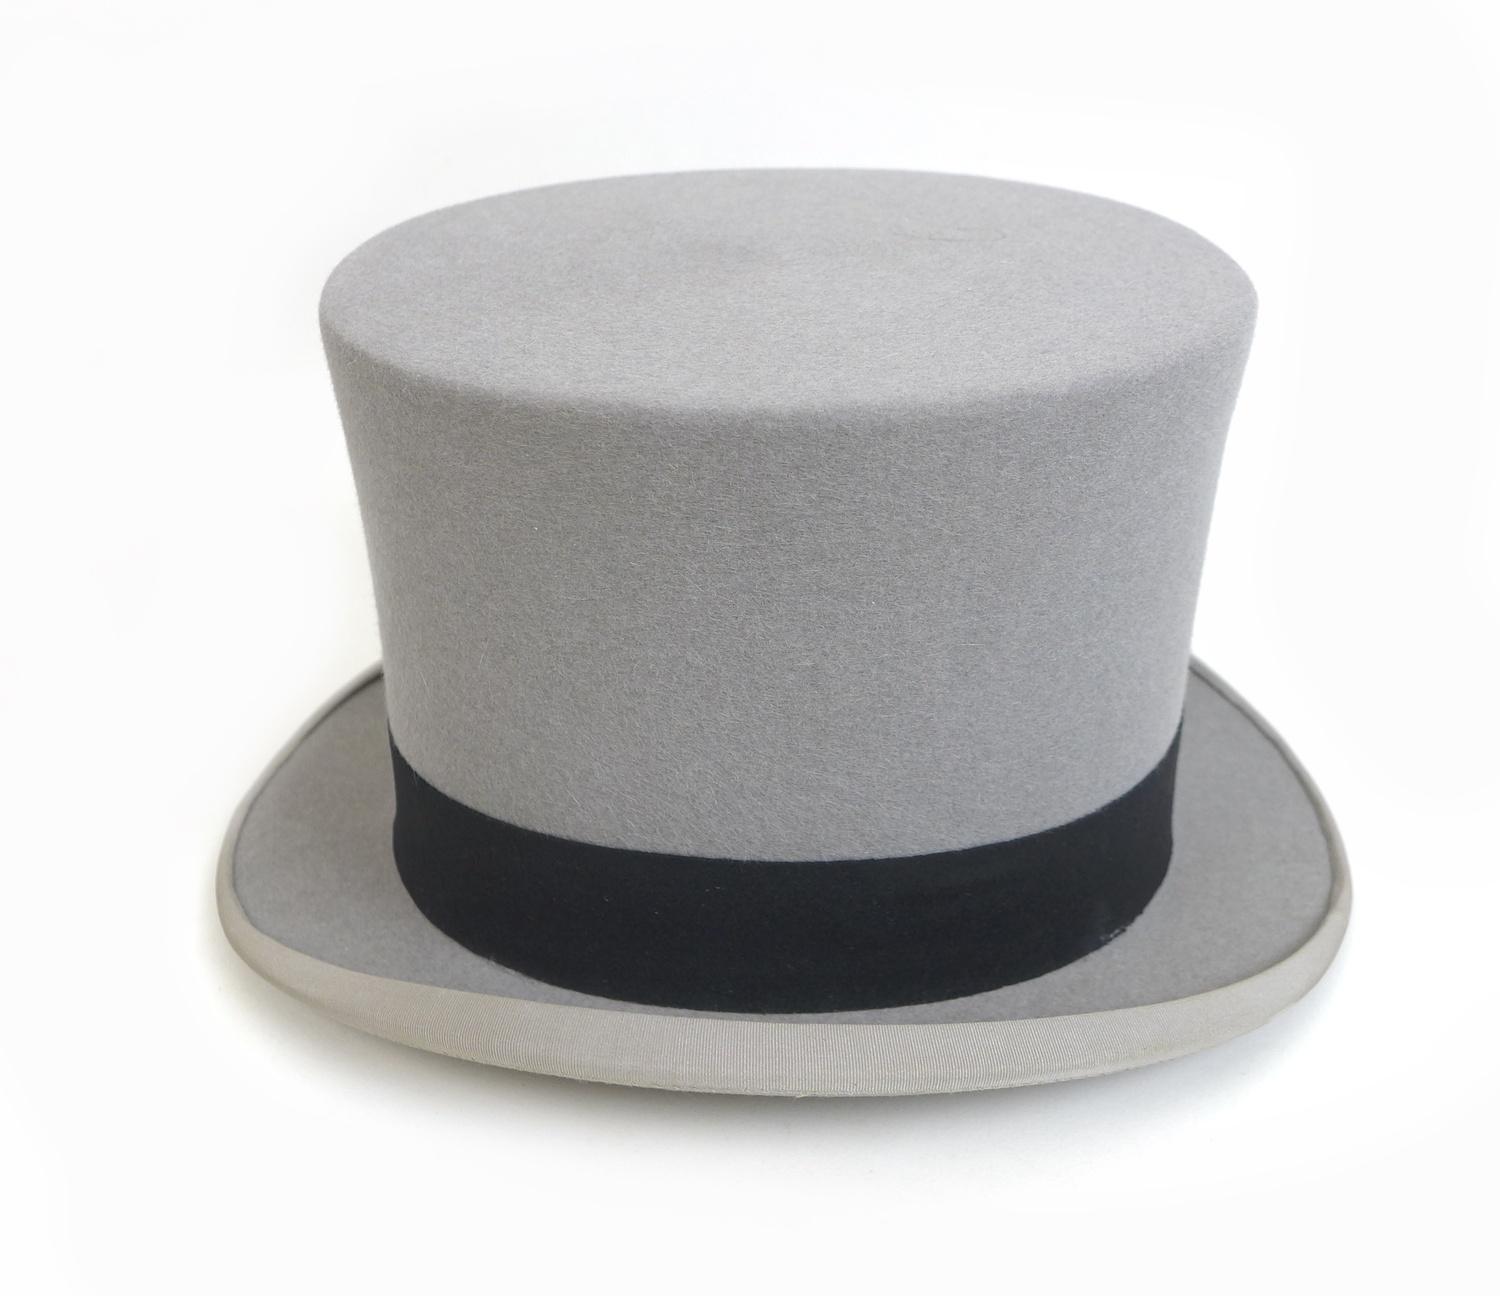 Two vintage grey felt top hats, comprising two a grey felt top hats, with one by Kirsop of Glasgow - Image 3 of 15